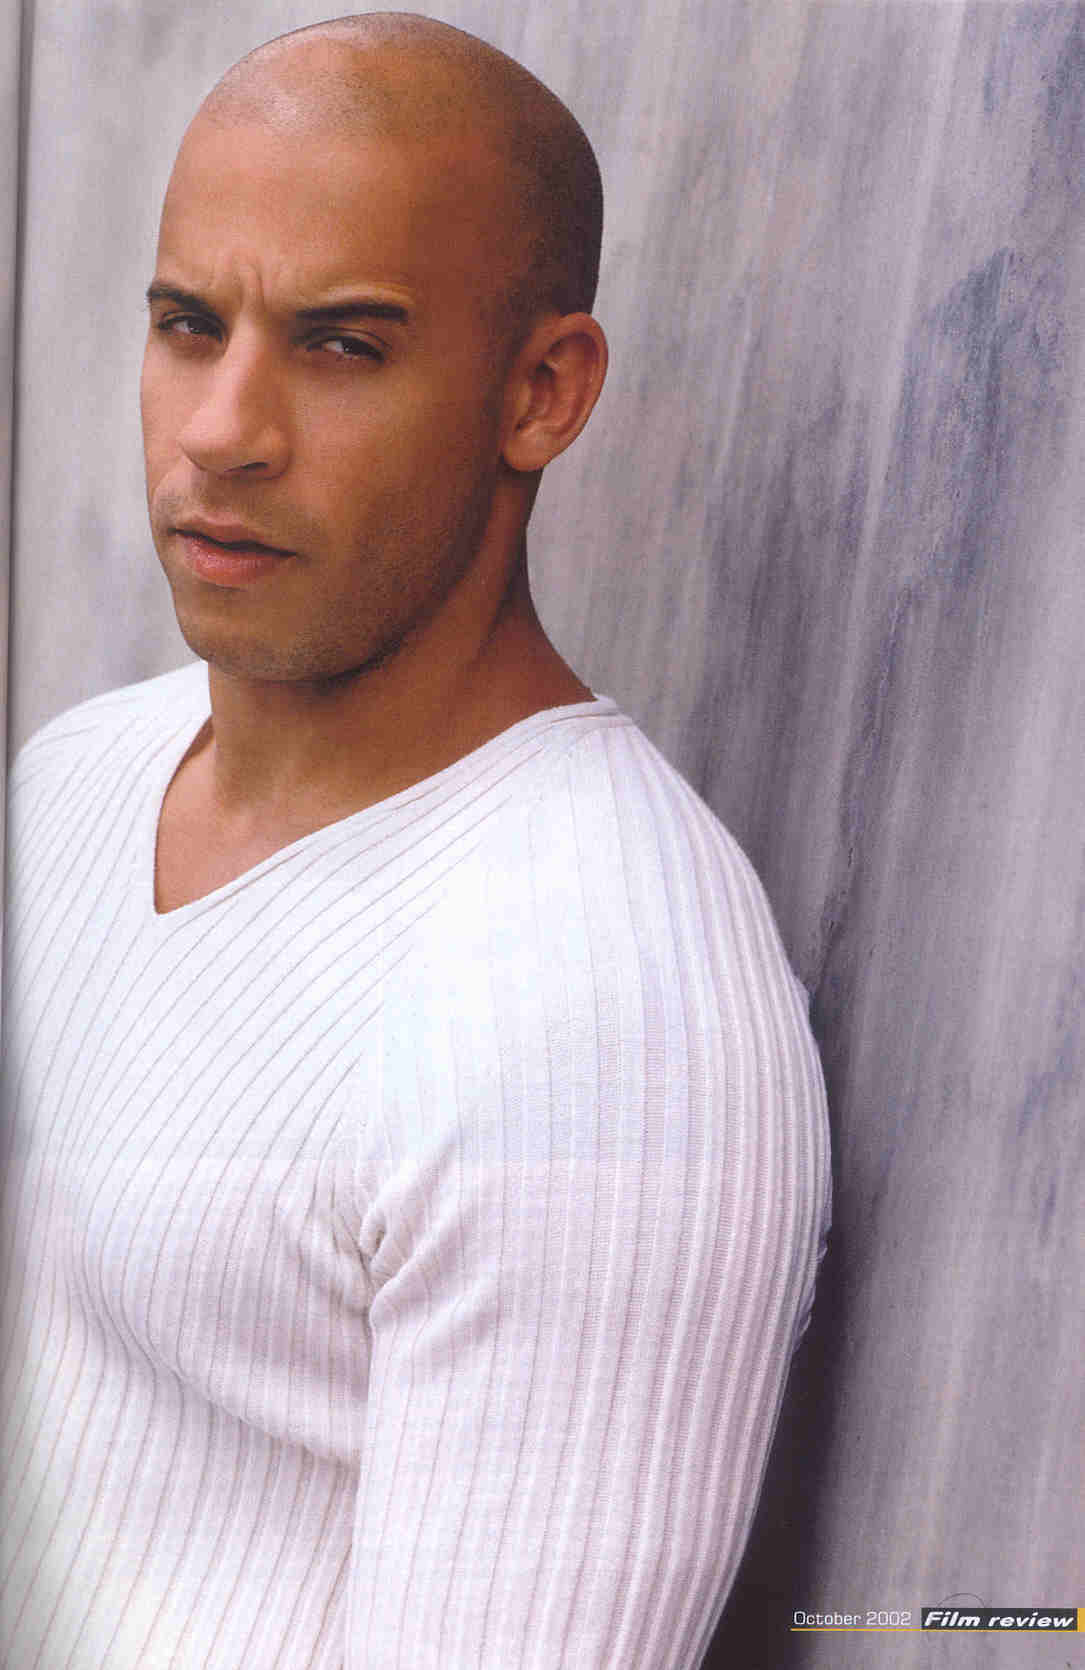 Vin Diesel photo 52 of 127 pics, wallpaper - photo #49834 - ThePlace2